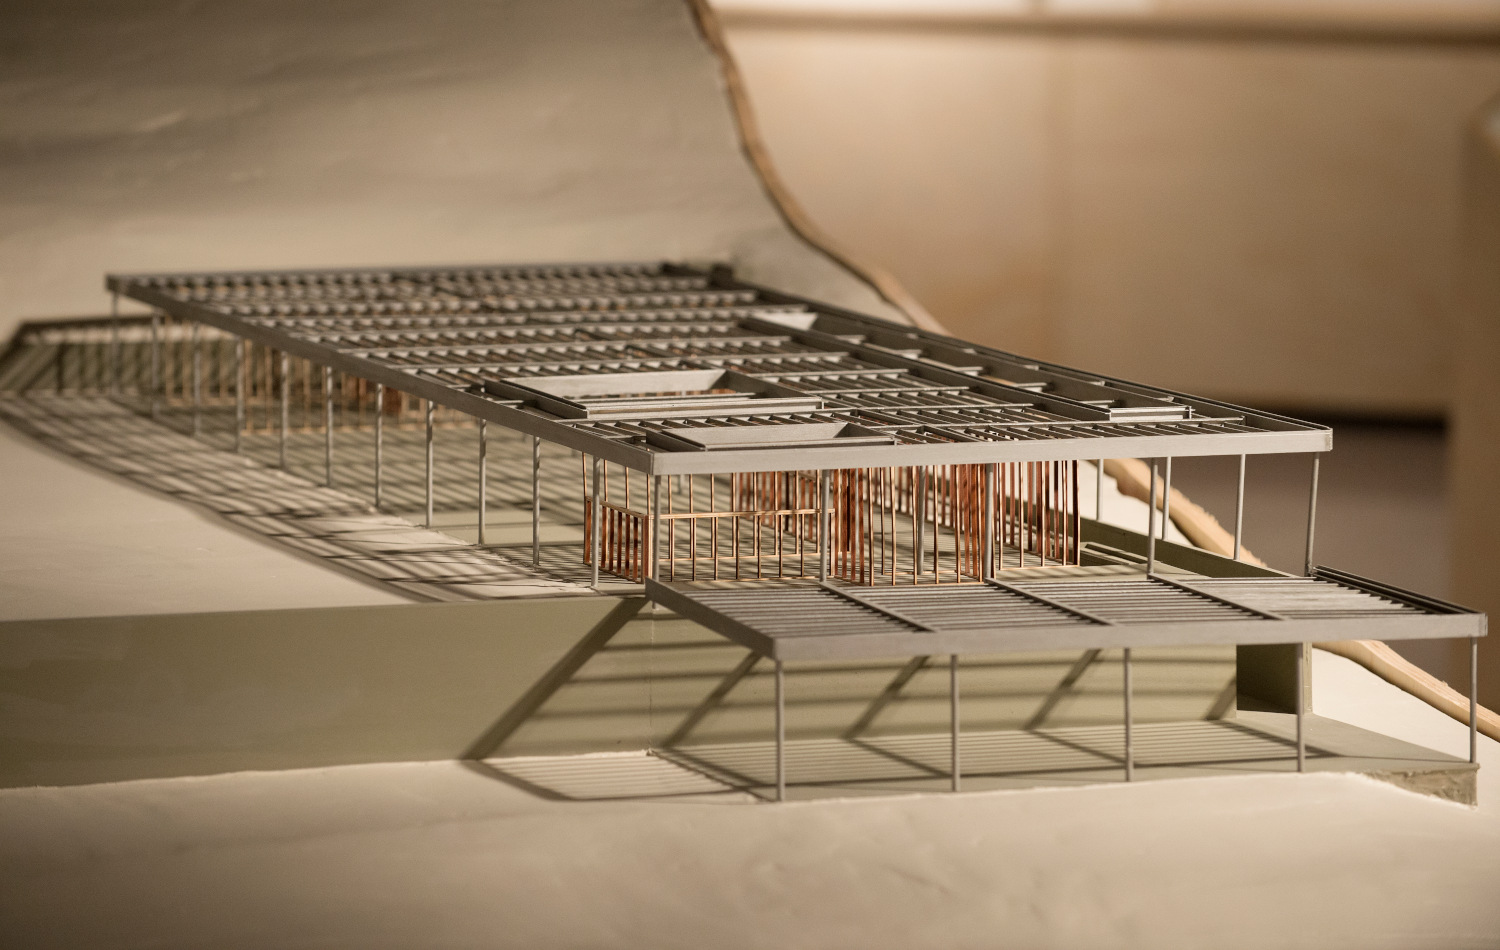 A model of the David and Riva Schrage House designed by Raphael Soriano, one of the leading visionaries of mid-century modern architecture who taught in the Department of Architecture.